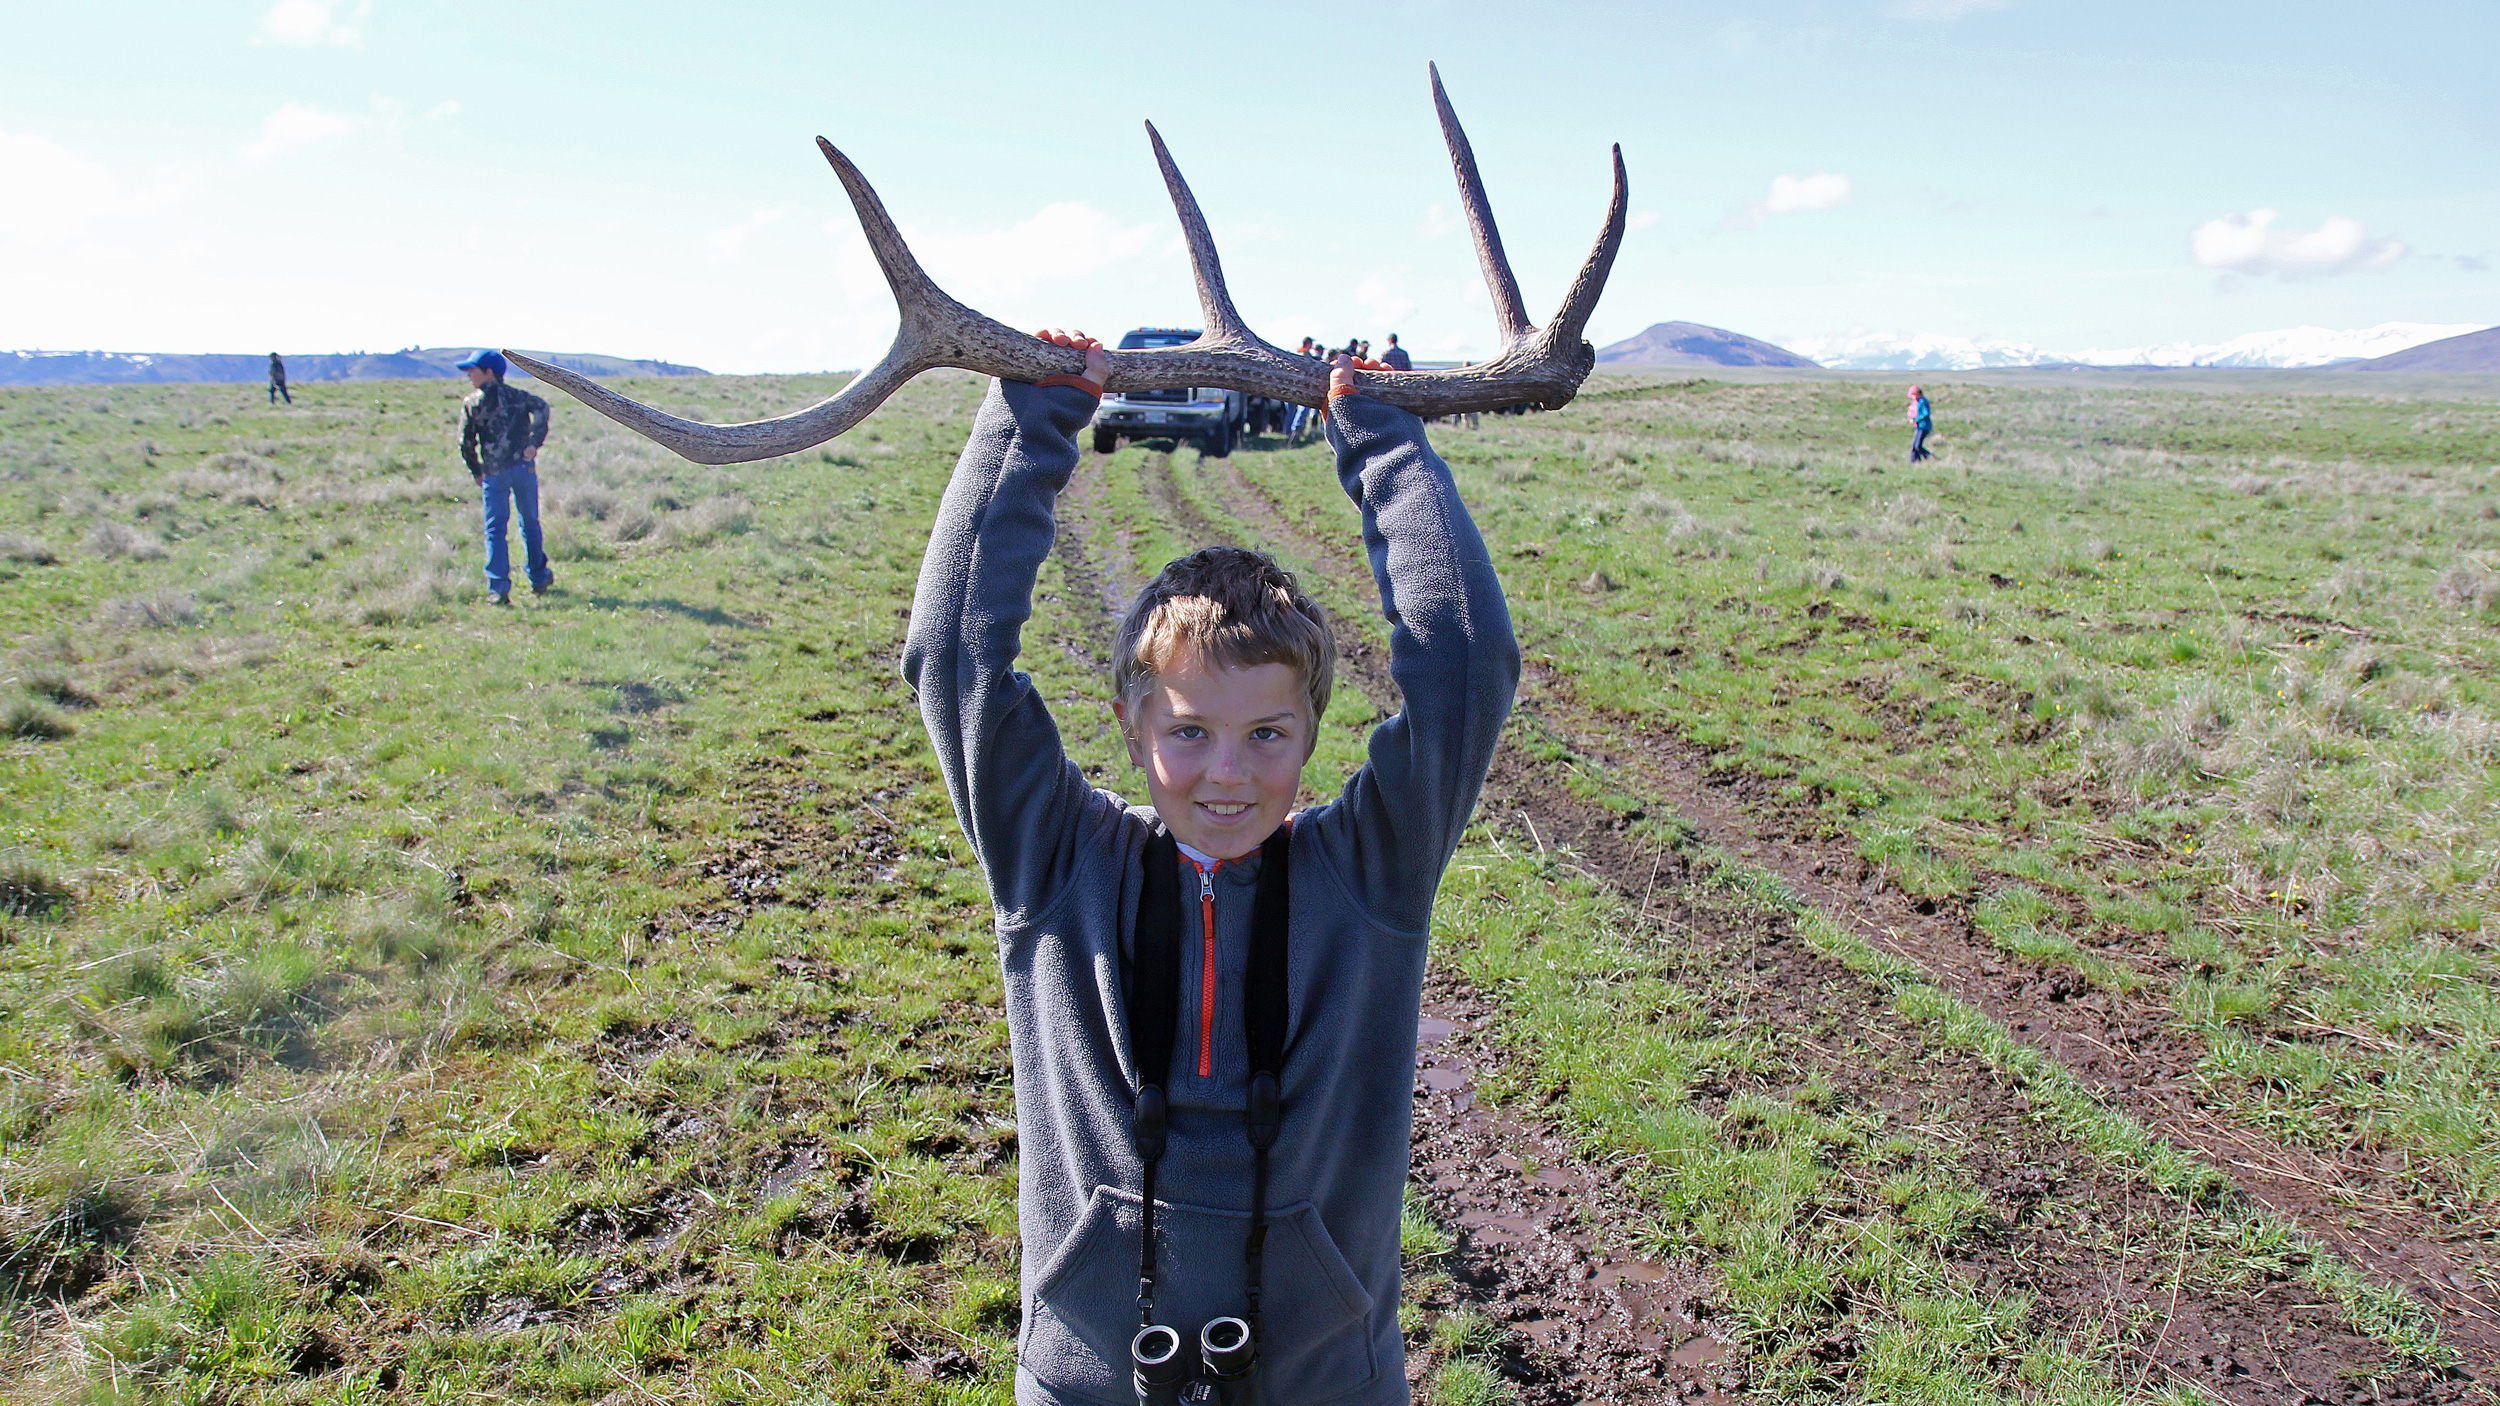 Drew Beachy, son of assistant steward Mike Beachy, hoists one of the first antlers collected during the hunt. Photo © The Nature Conservancy (Matt Miller)